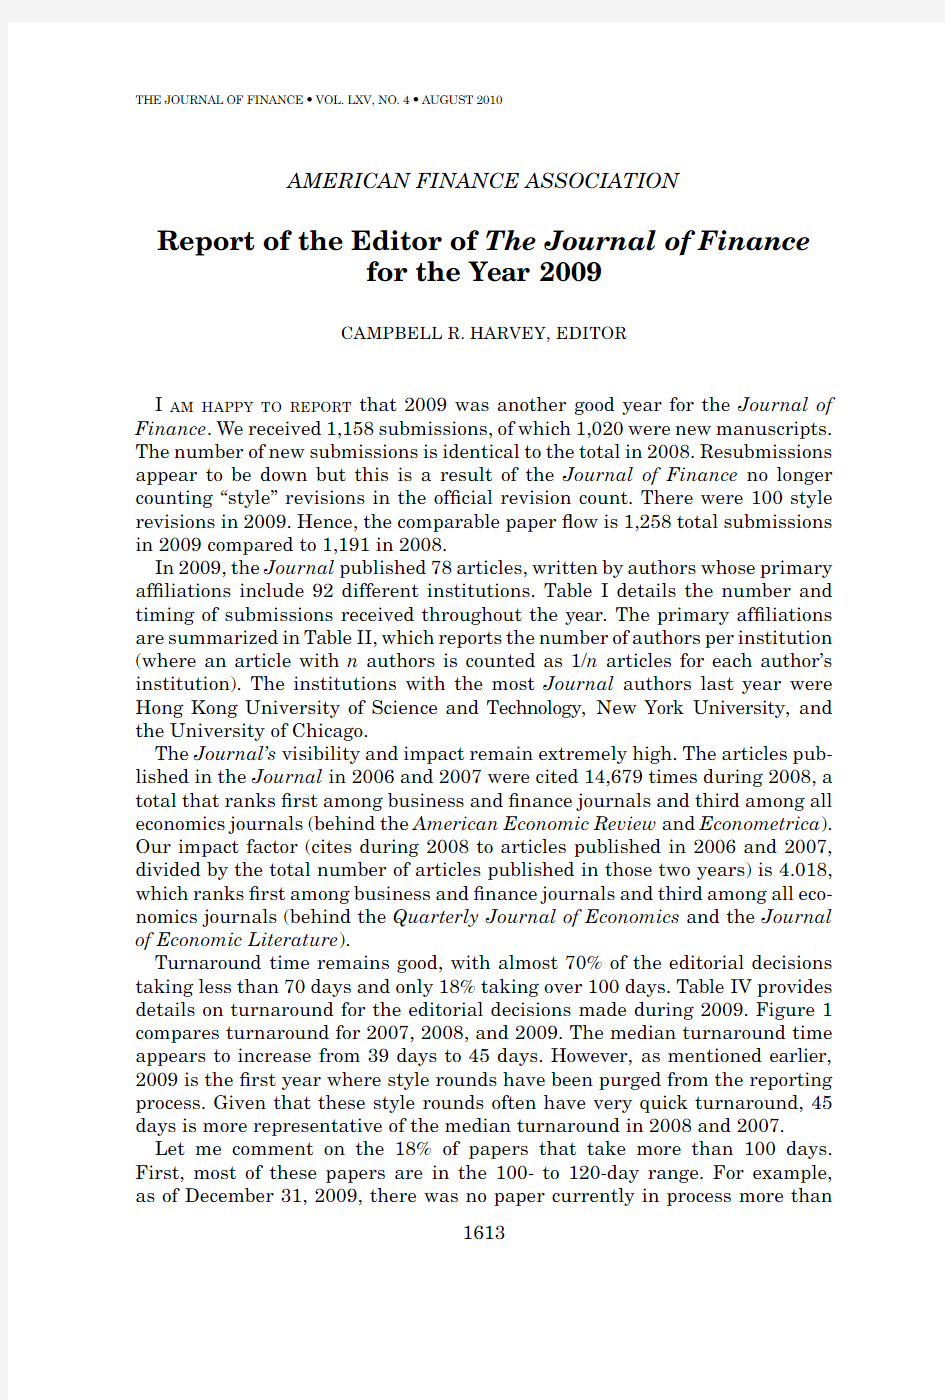 Report of the Editor of The Journal of Finance for the Year 2009